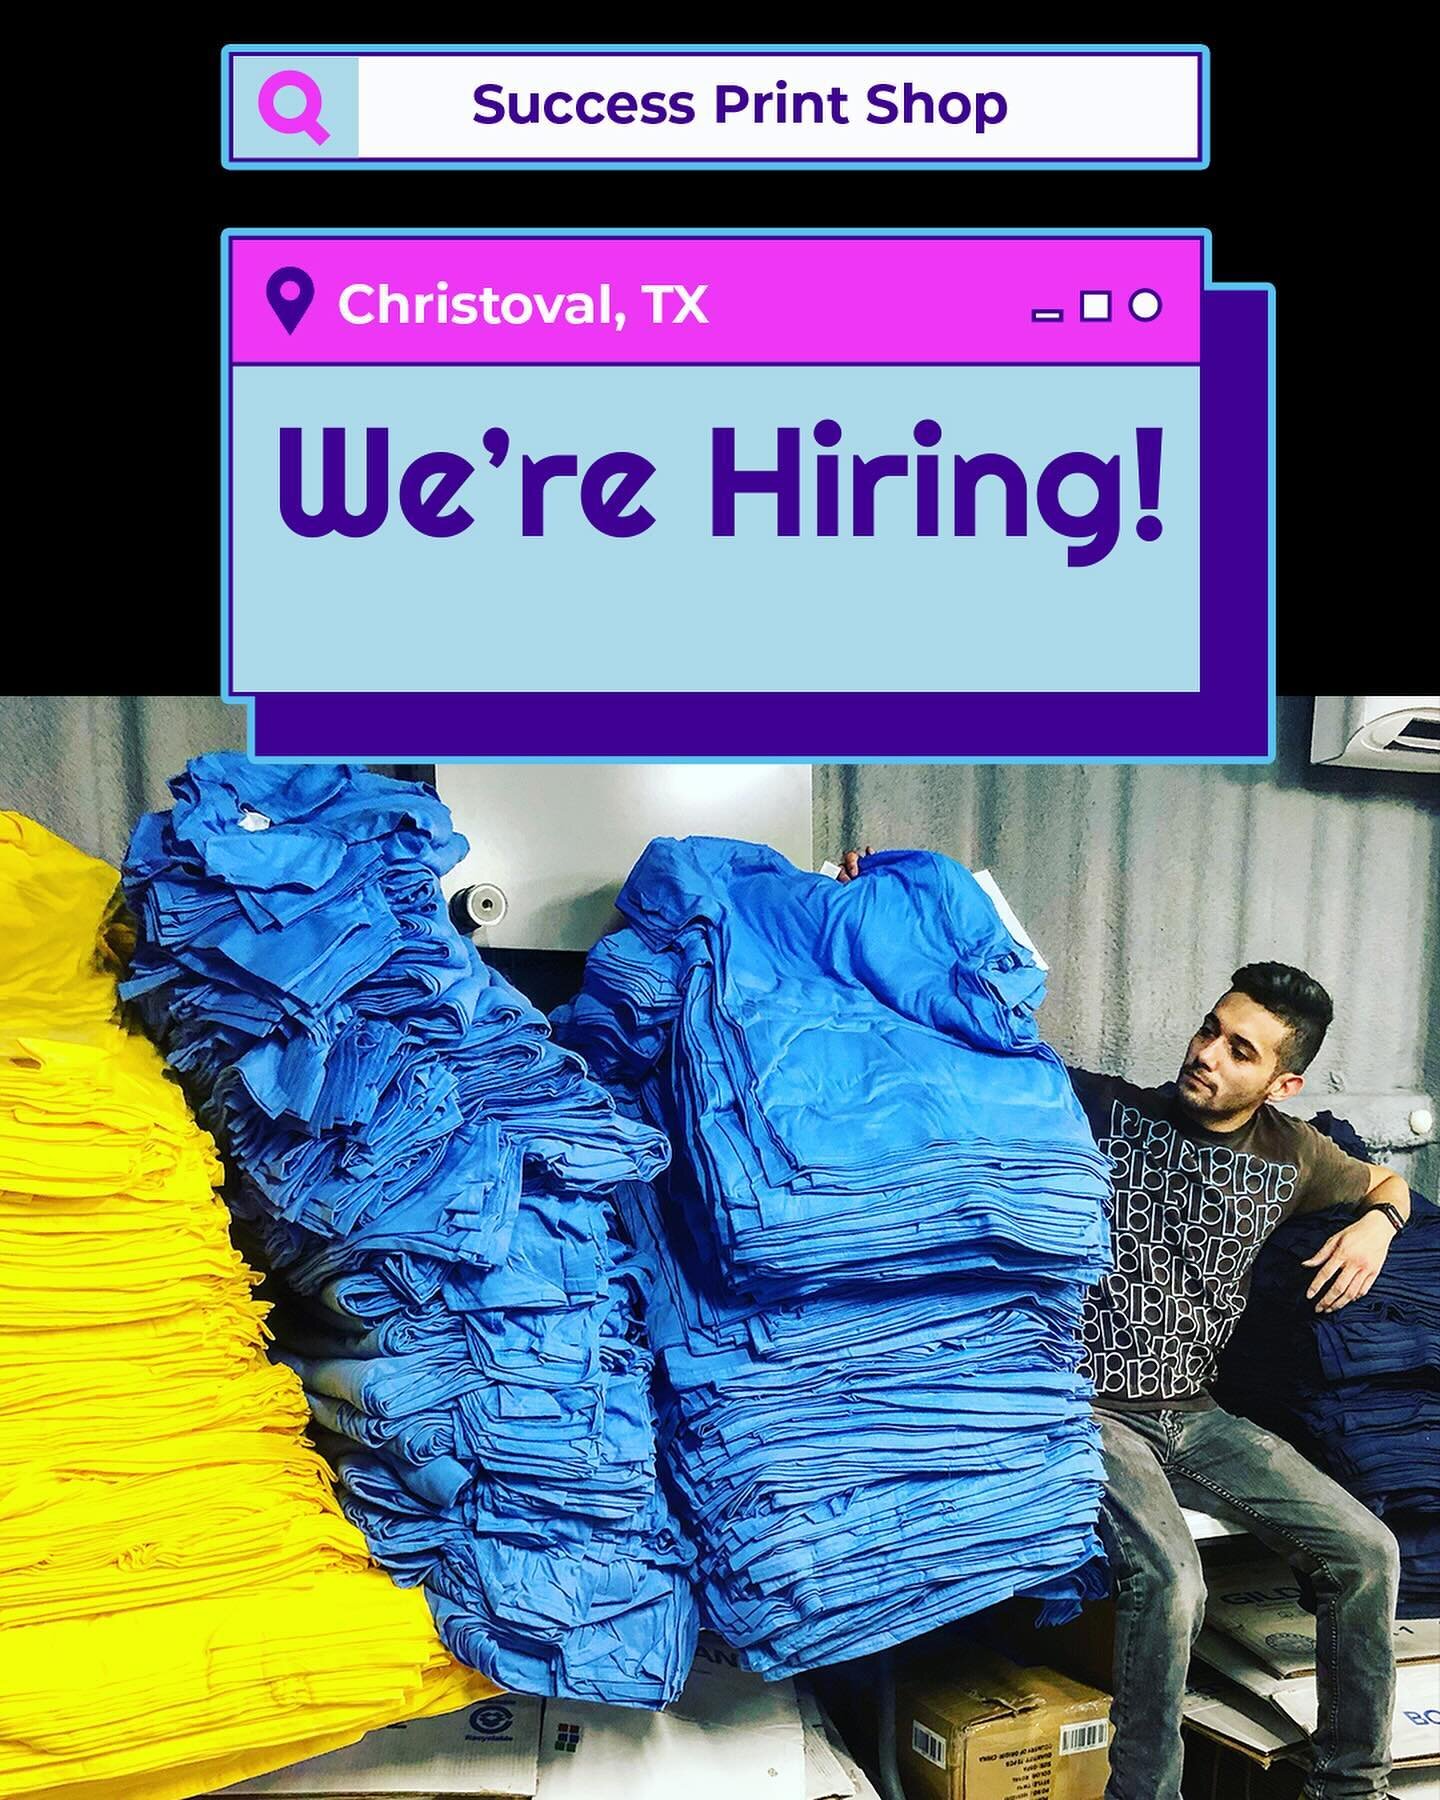 Success Print Shop, located in Christoval, TX  is on the lookout for a detail-oriented go-getter who can help take us to the next level by assisting our current production team! 

Responsibilities:
👕Organize shirt styles, colors, and sizes for flawl